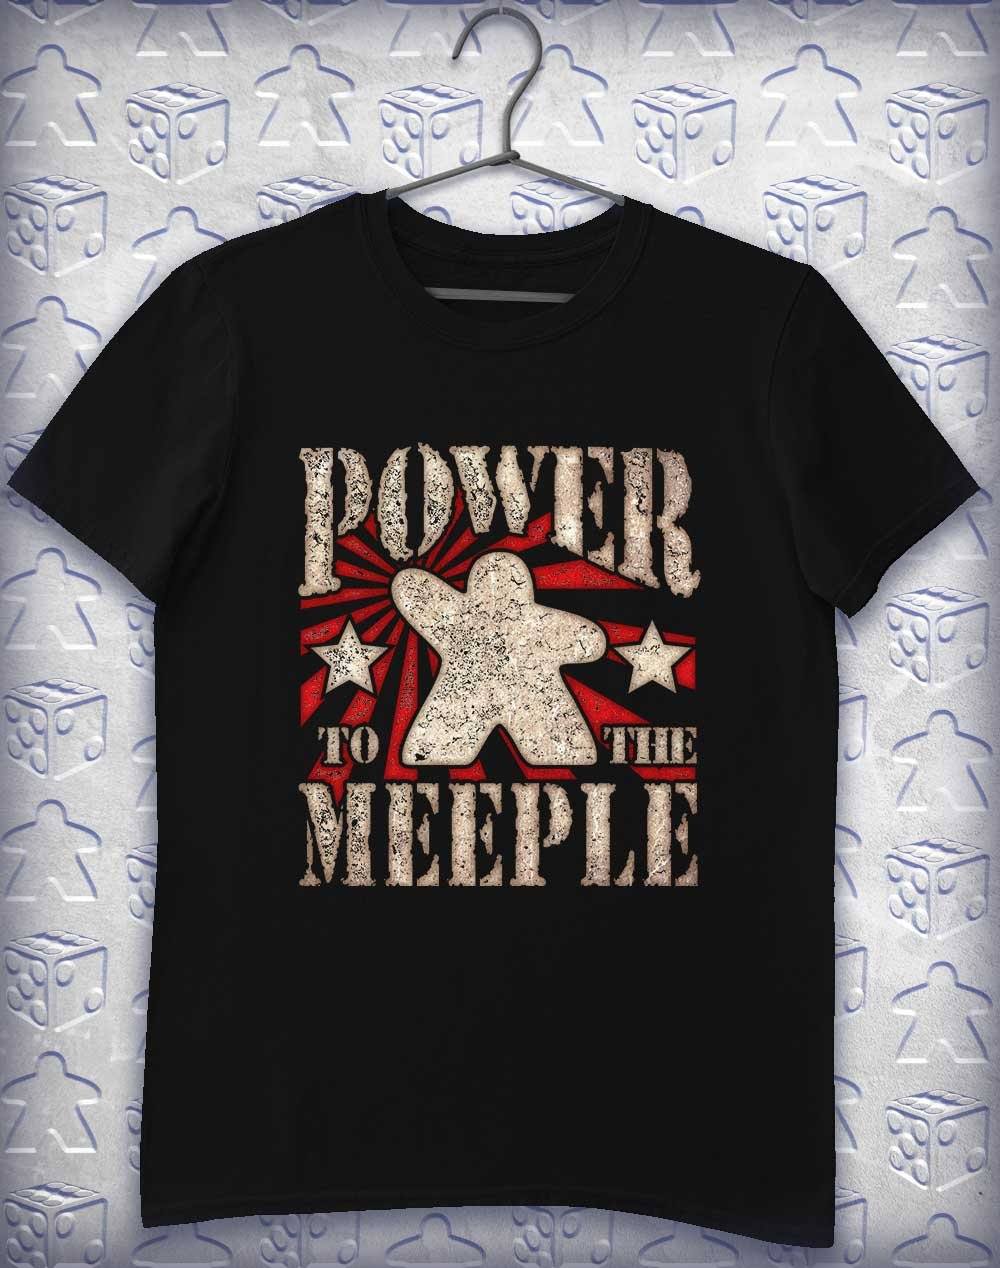 Power to the Meeple Alphagamer T-Shirt L / Black  - Off World Tees